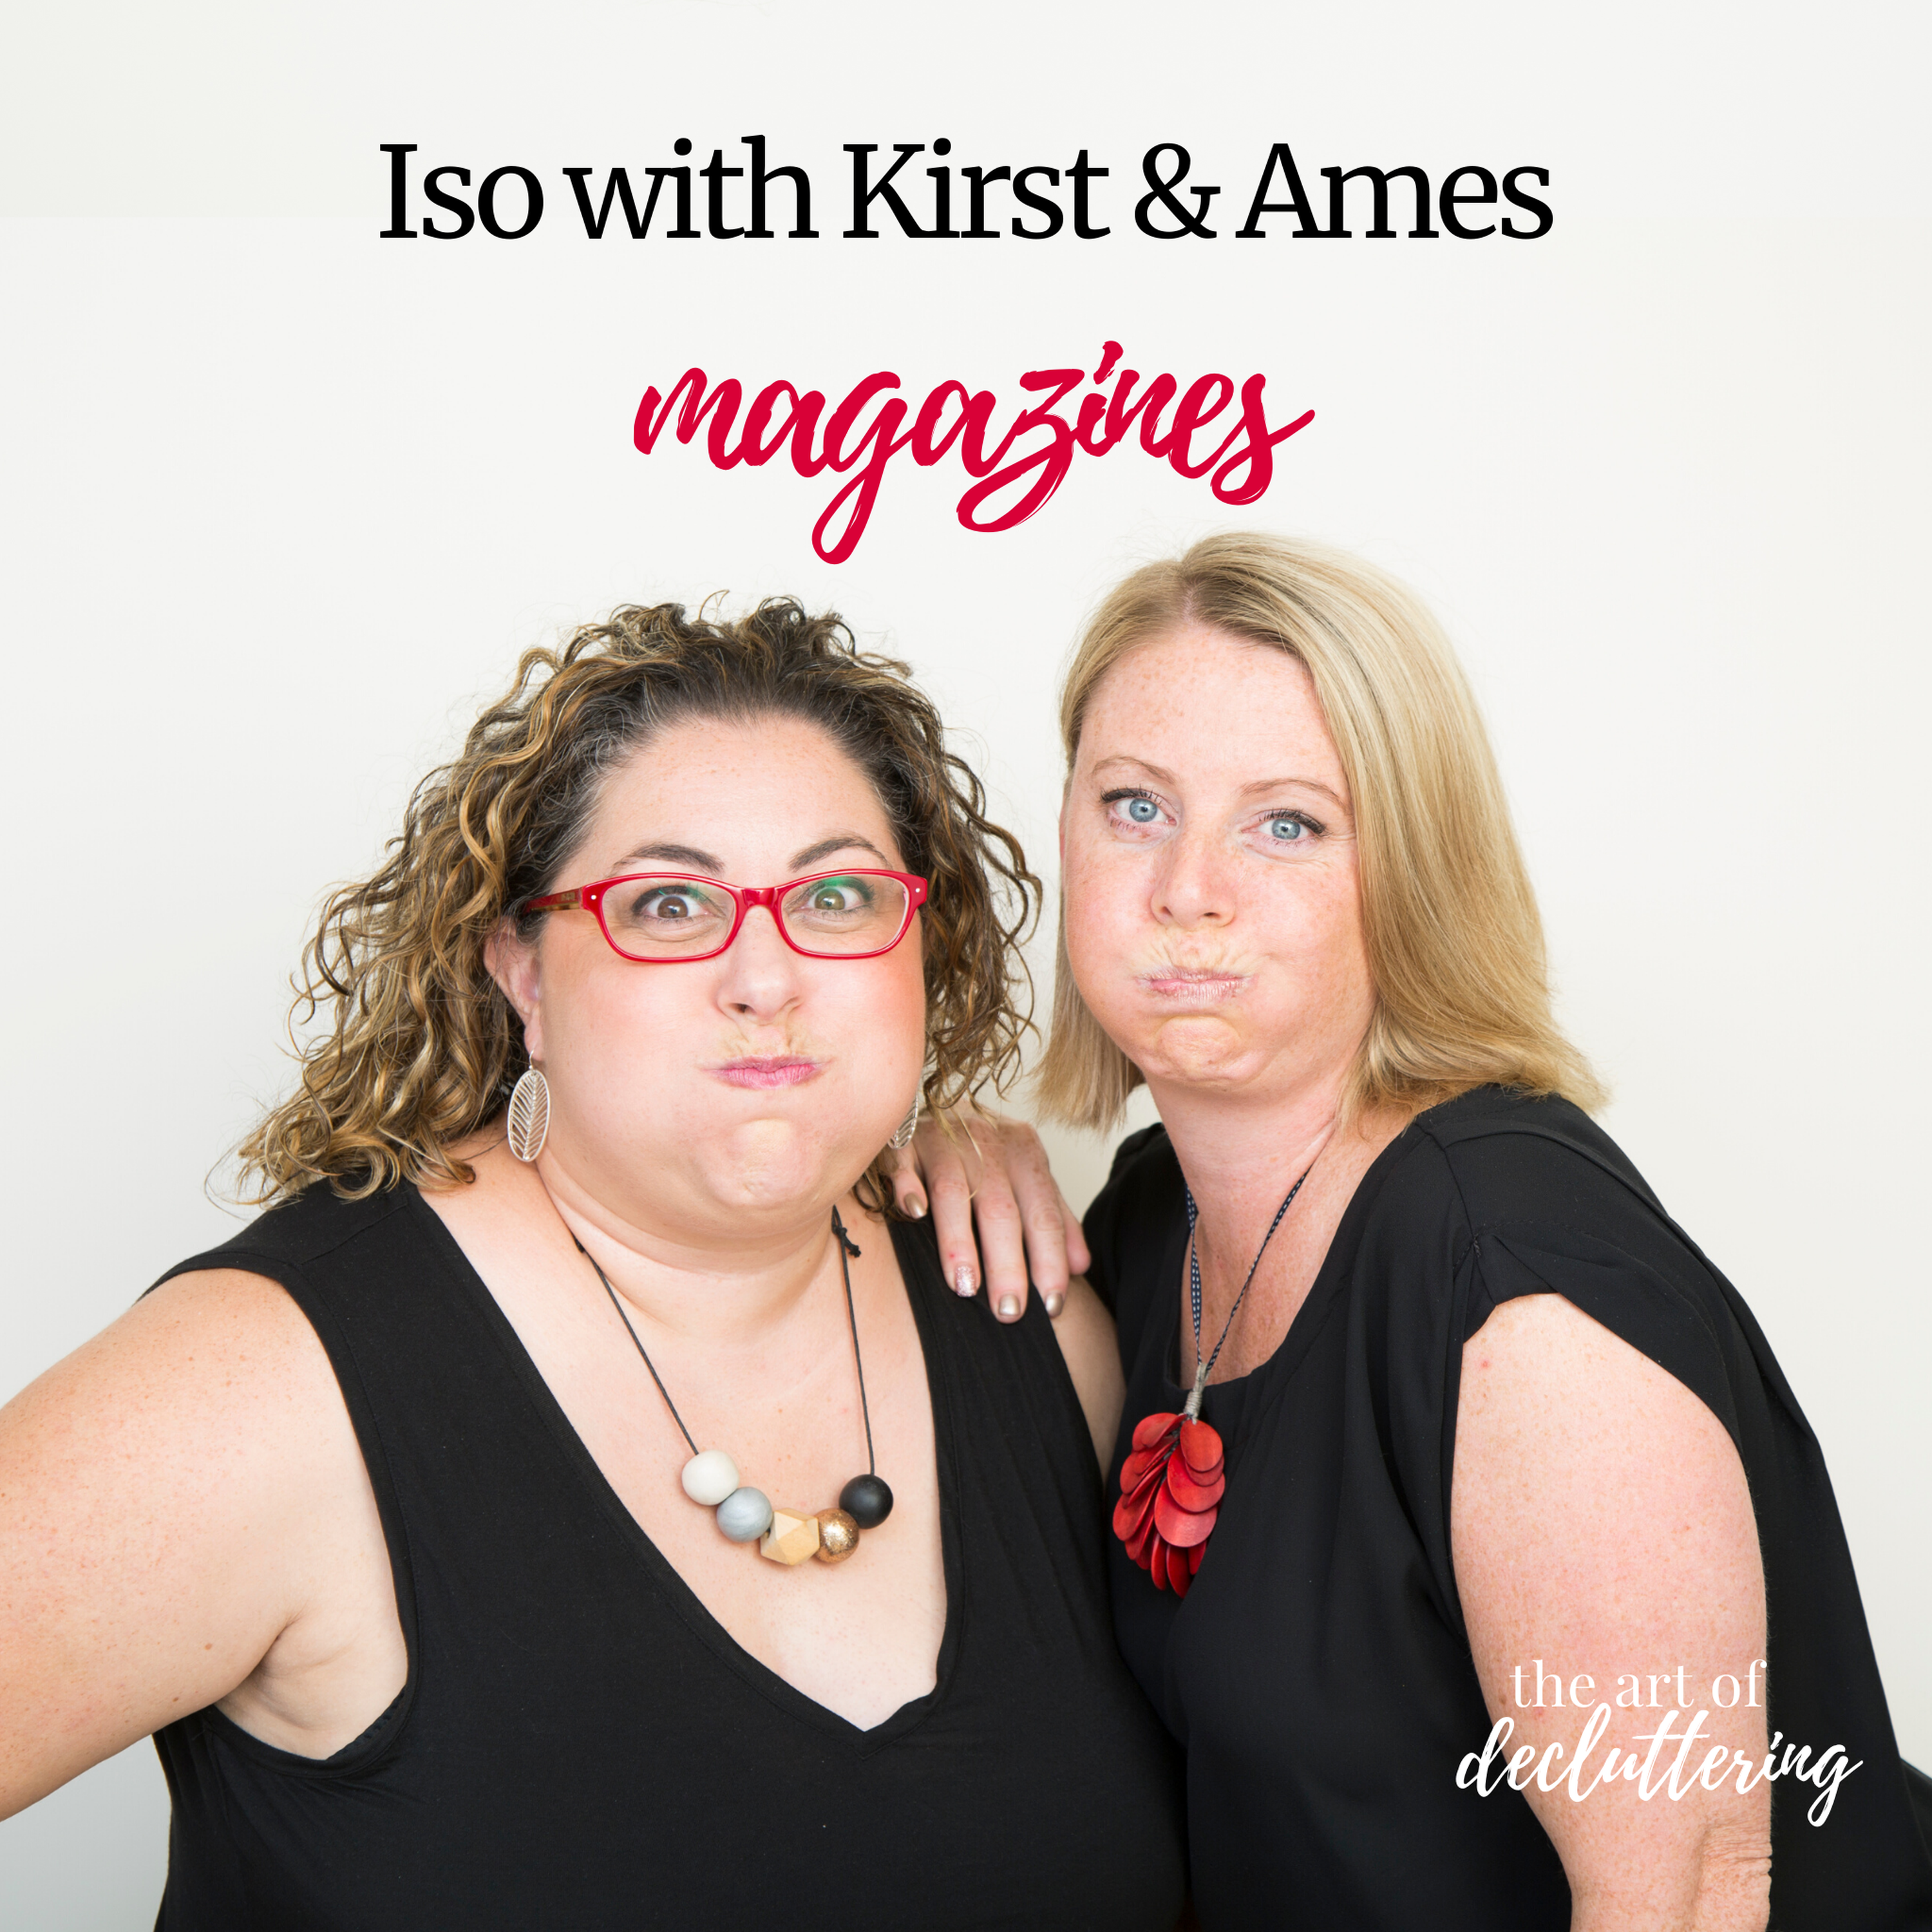 Iso with Kirst & Ames - Magazines